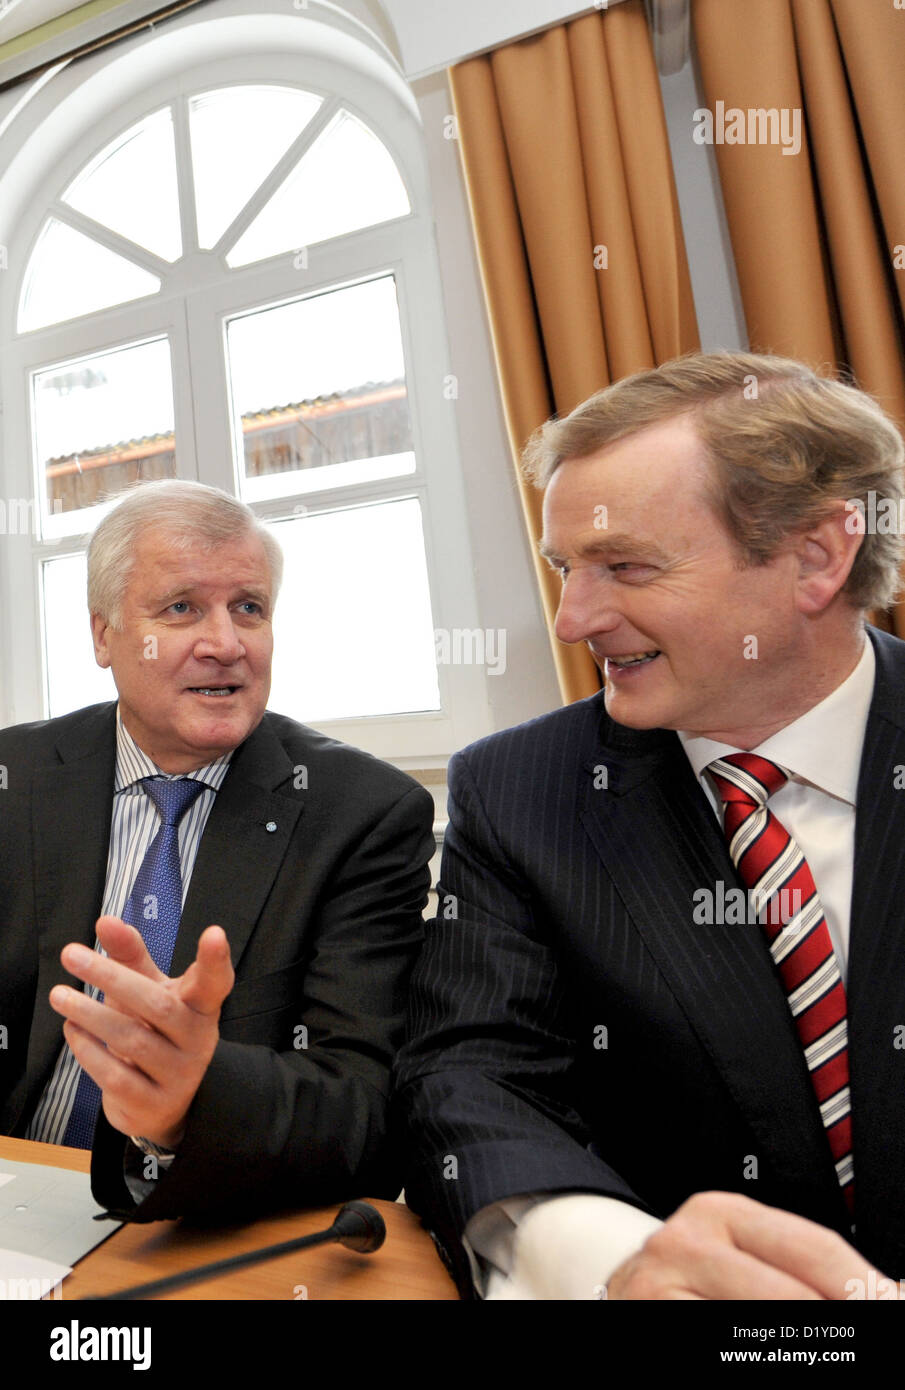 CSU chairman Horst Seehofer (L) and his guest, Irish Prime Minister Enda Kenny talk during the winter conference of the CSU national committee at the training center of the Hanns Seidel Foundation in Wildbad Kreuth, Germany, 8 January 2013. In the beginning of 2013 Ireland has taken over the EU presidency of Cyprus. Photo: Frank Leonhardt Stock Photo